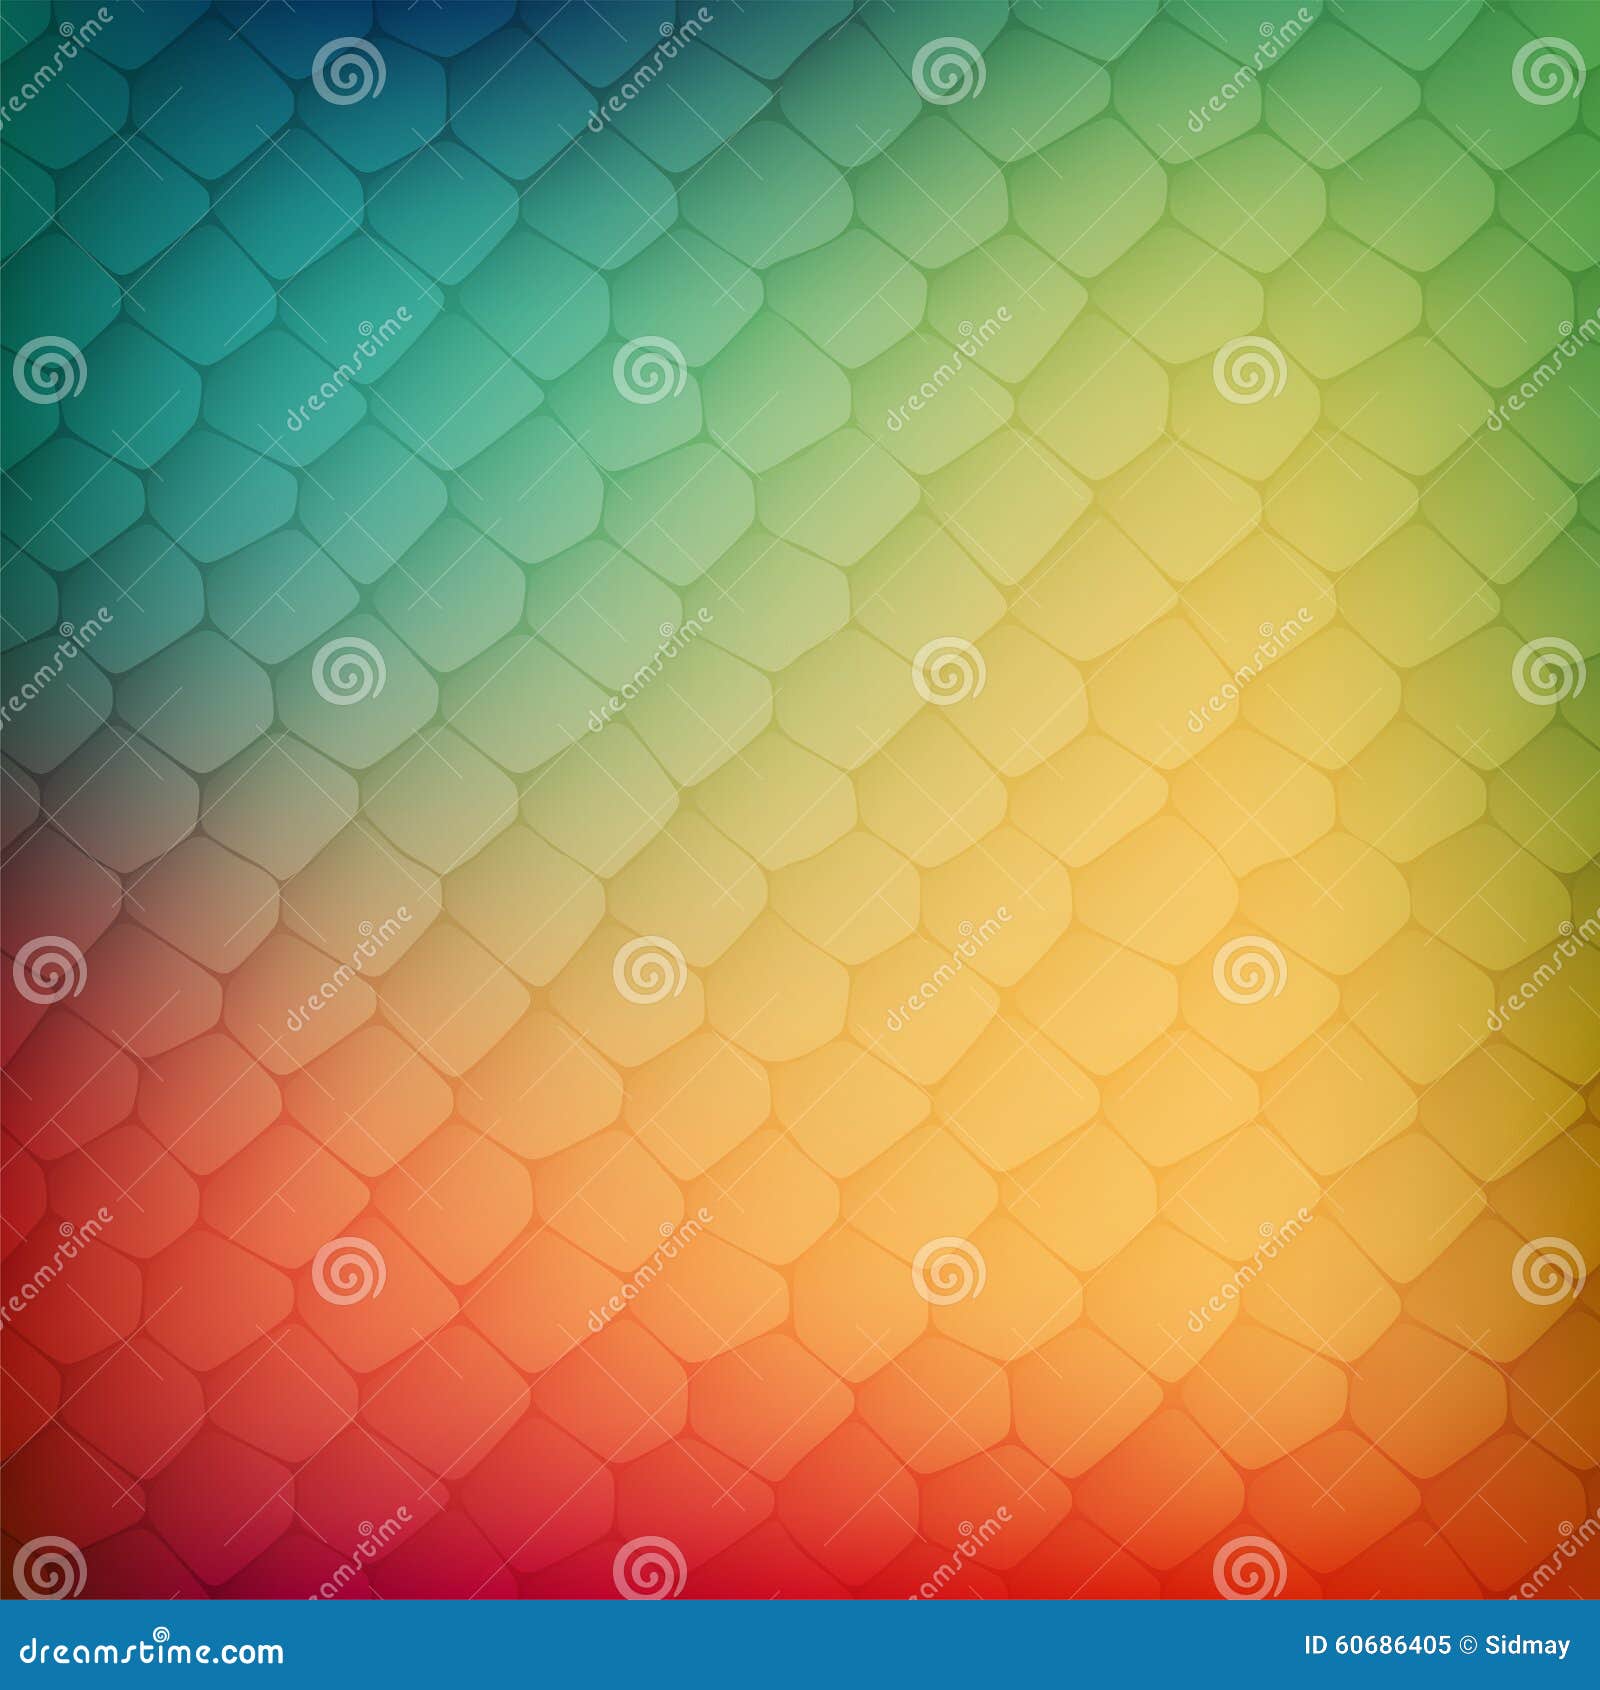 abstract background of colored cells